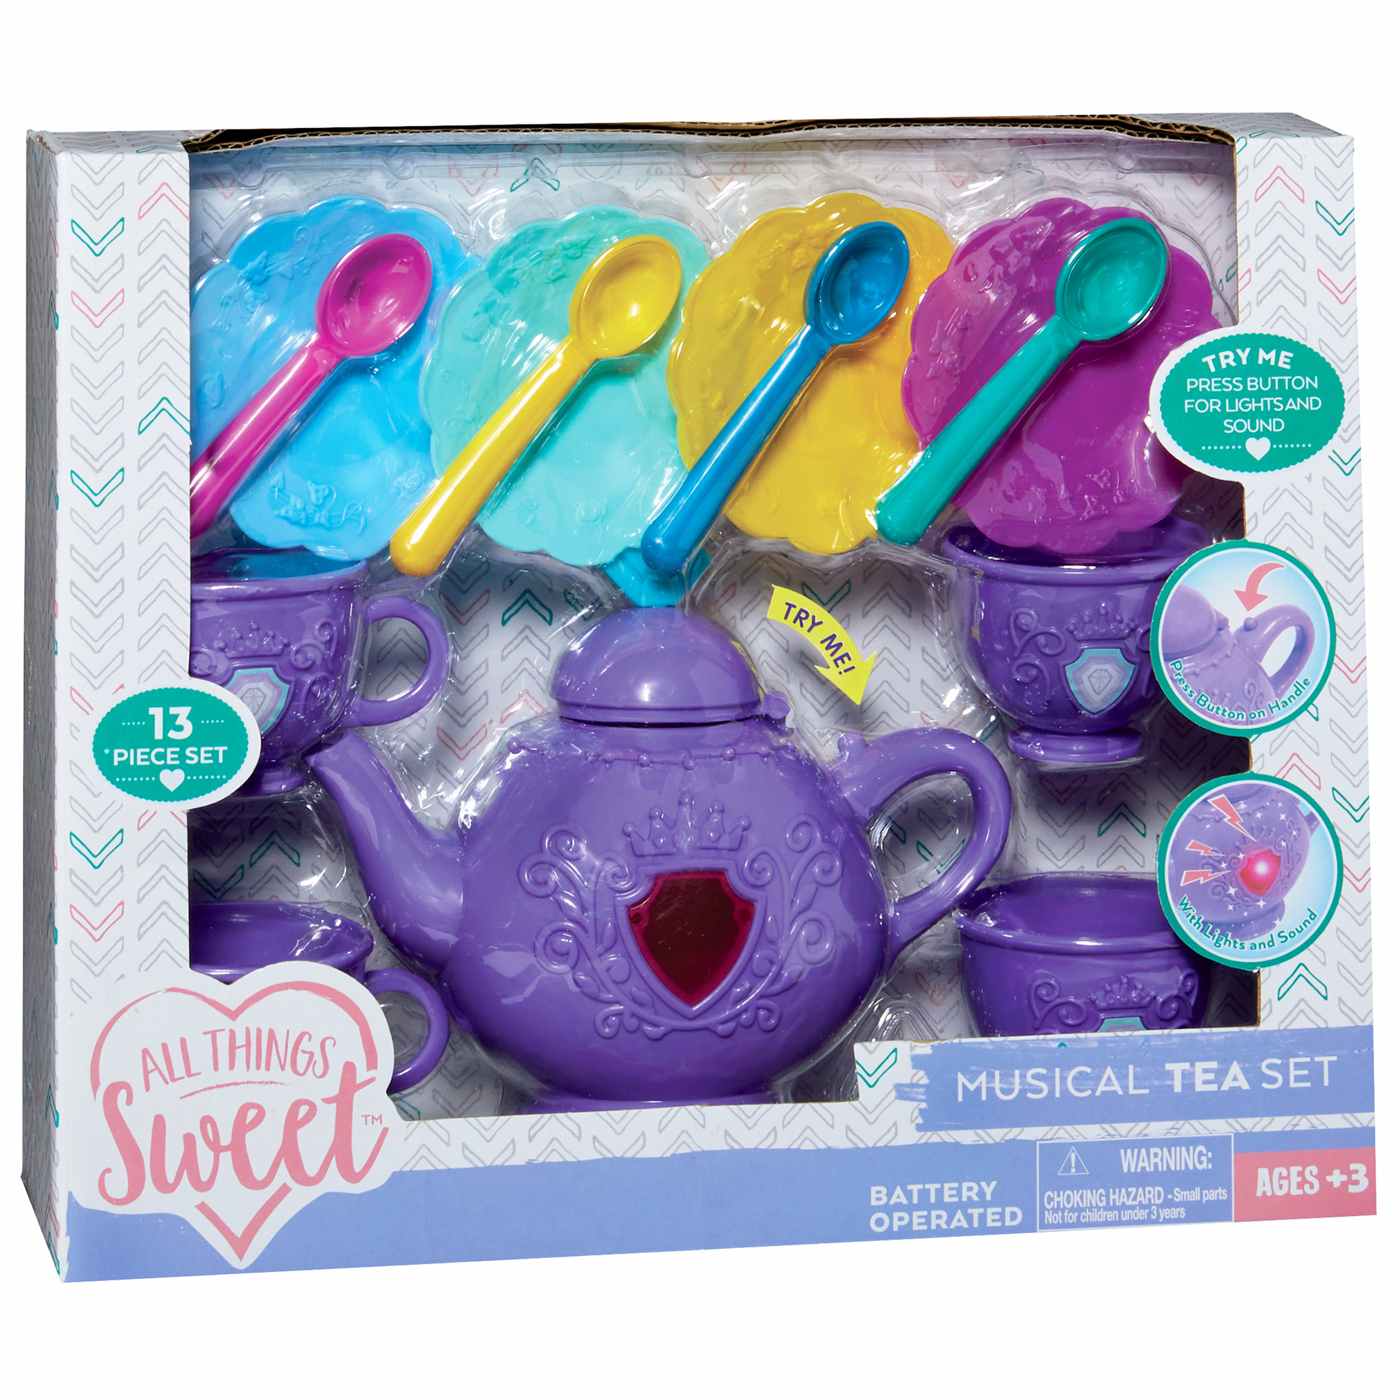 All Things Sweet Lights & Sounds Musical Tea Playset; image 1 of 2